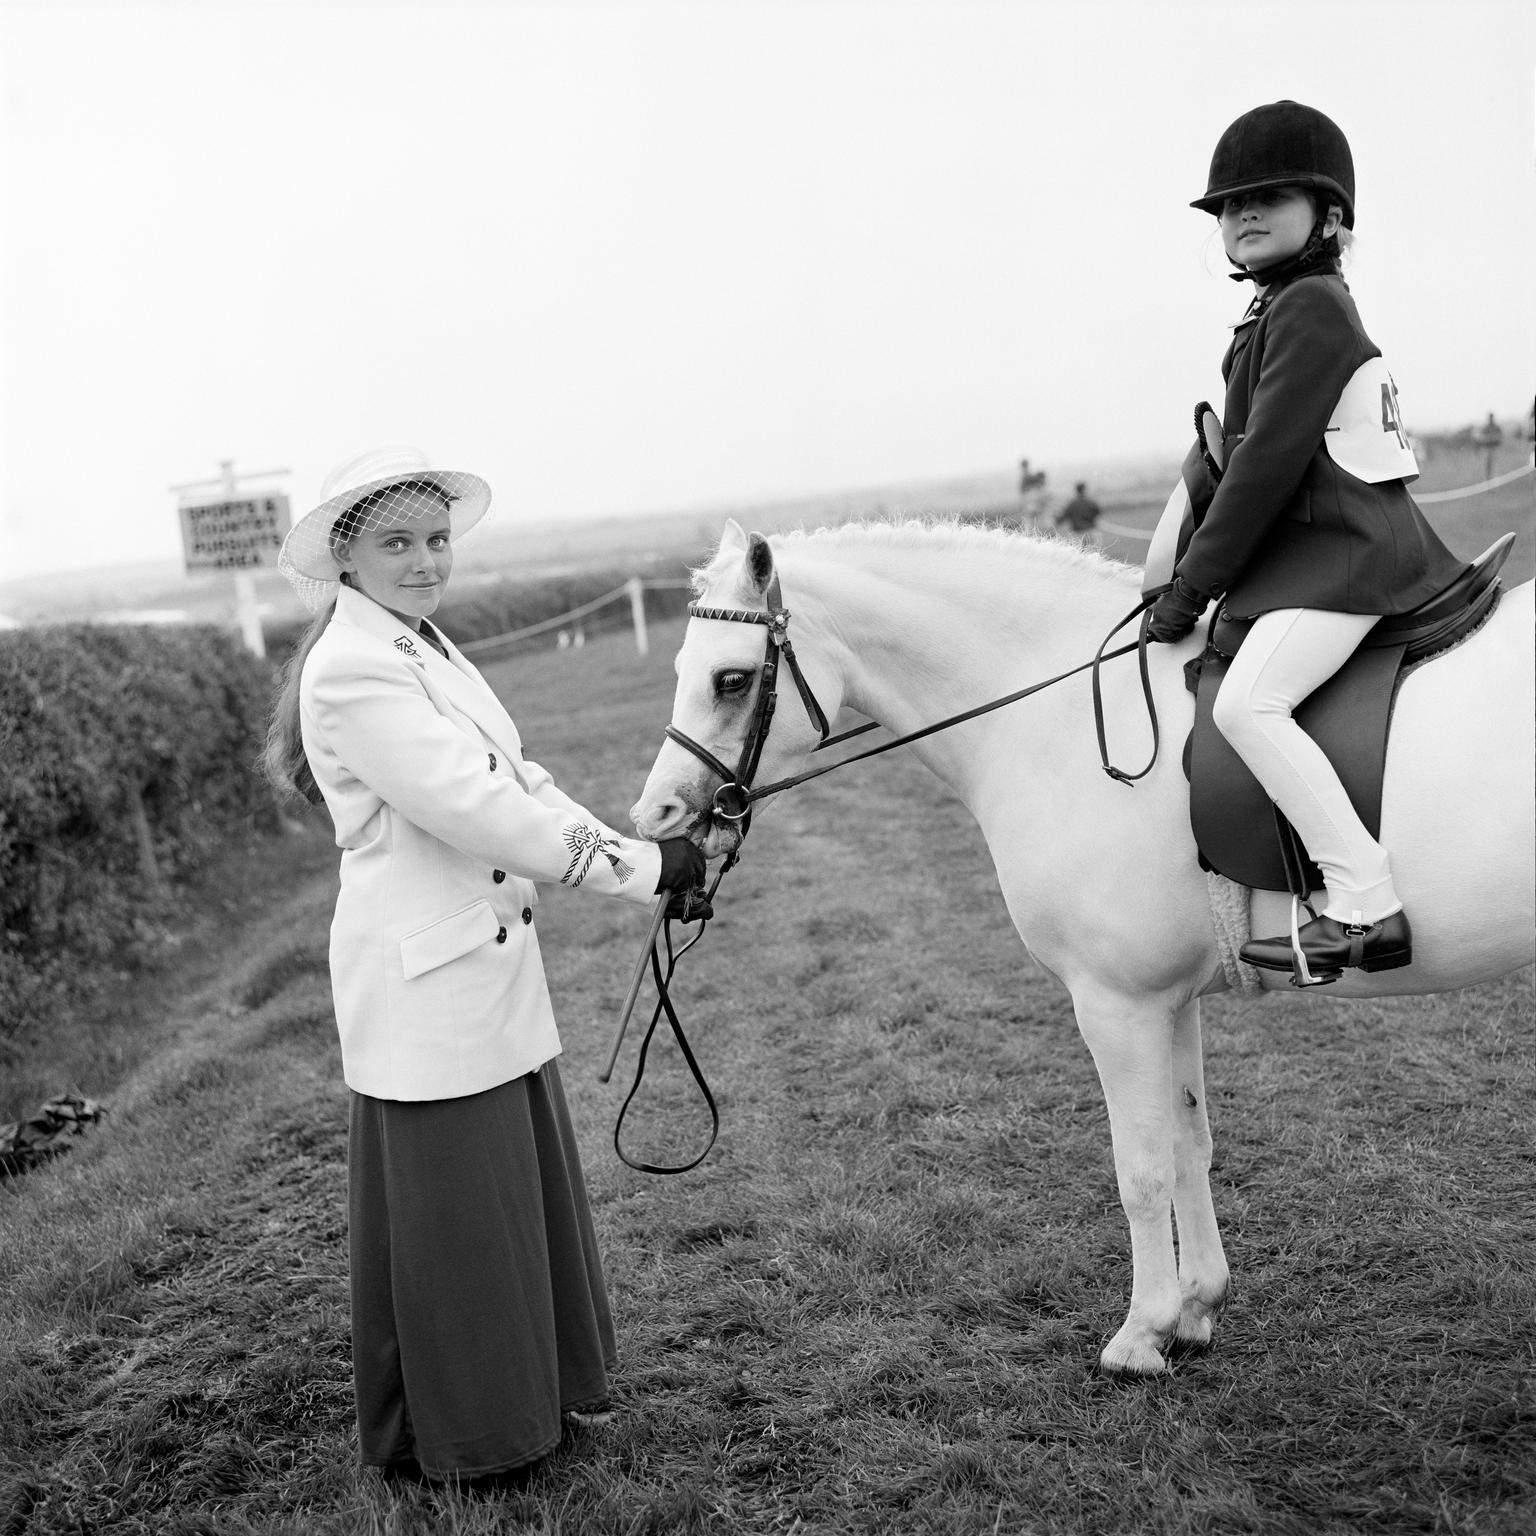 Anglesey show. Sian Jones, horse handler and 7 year old rider Kelsie Beattie. Cardiff, Wales